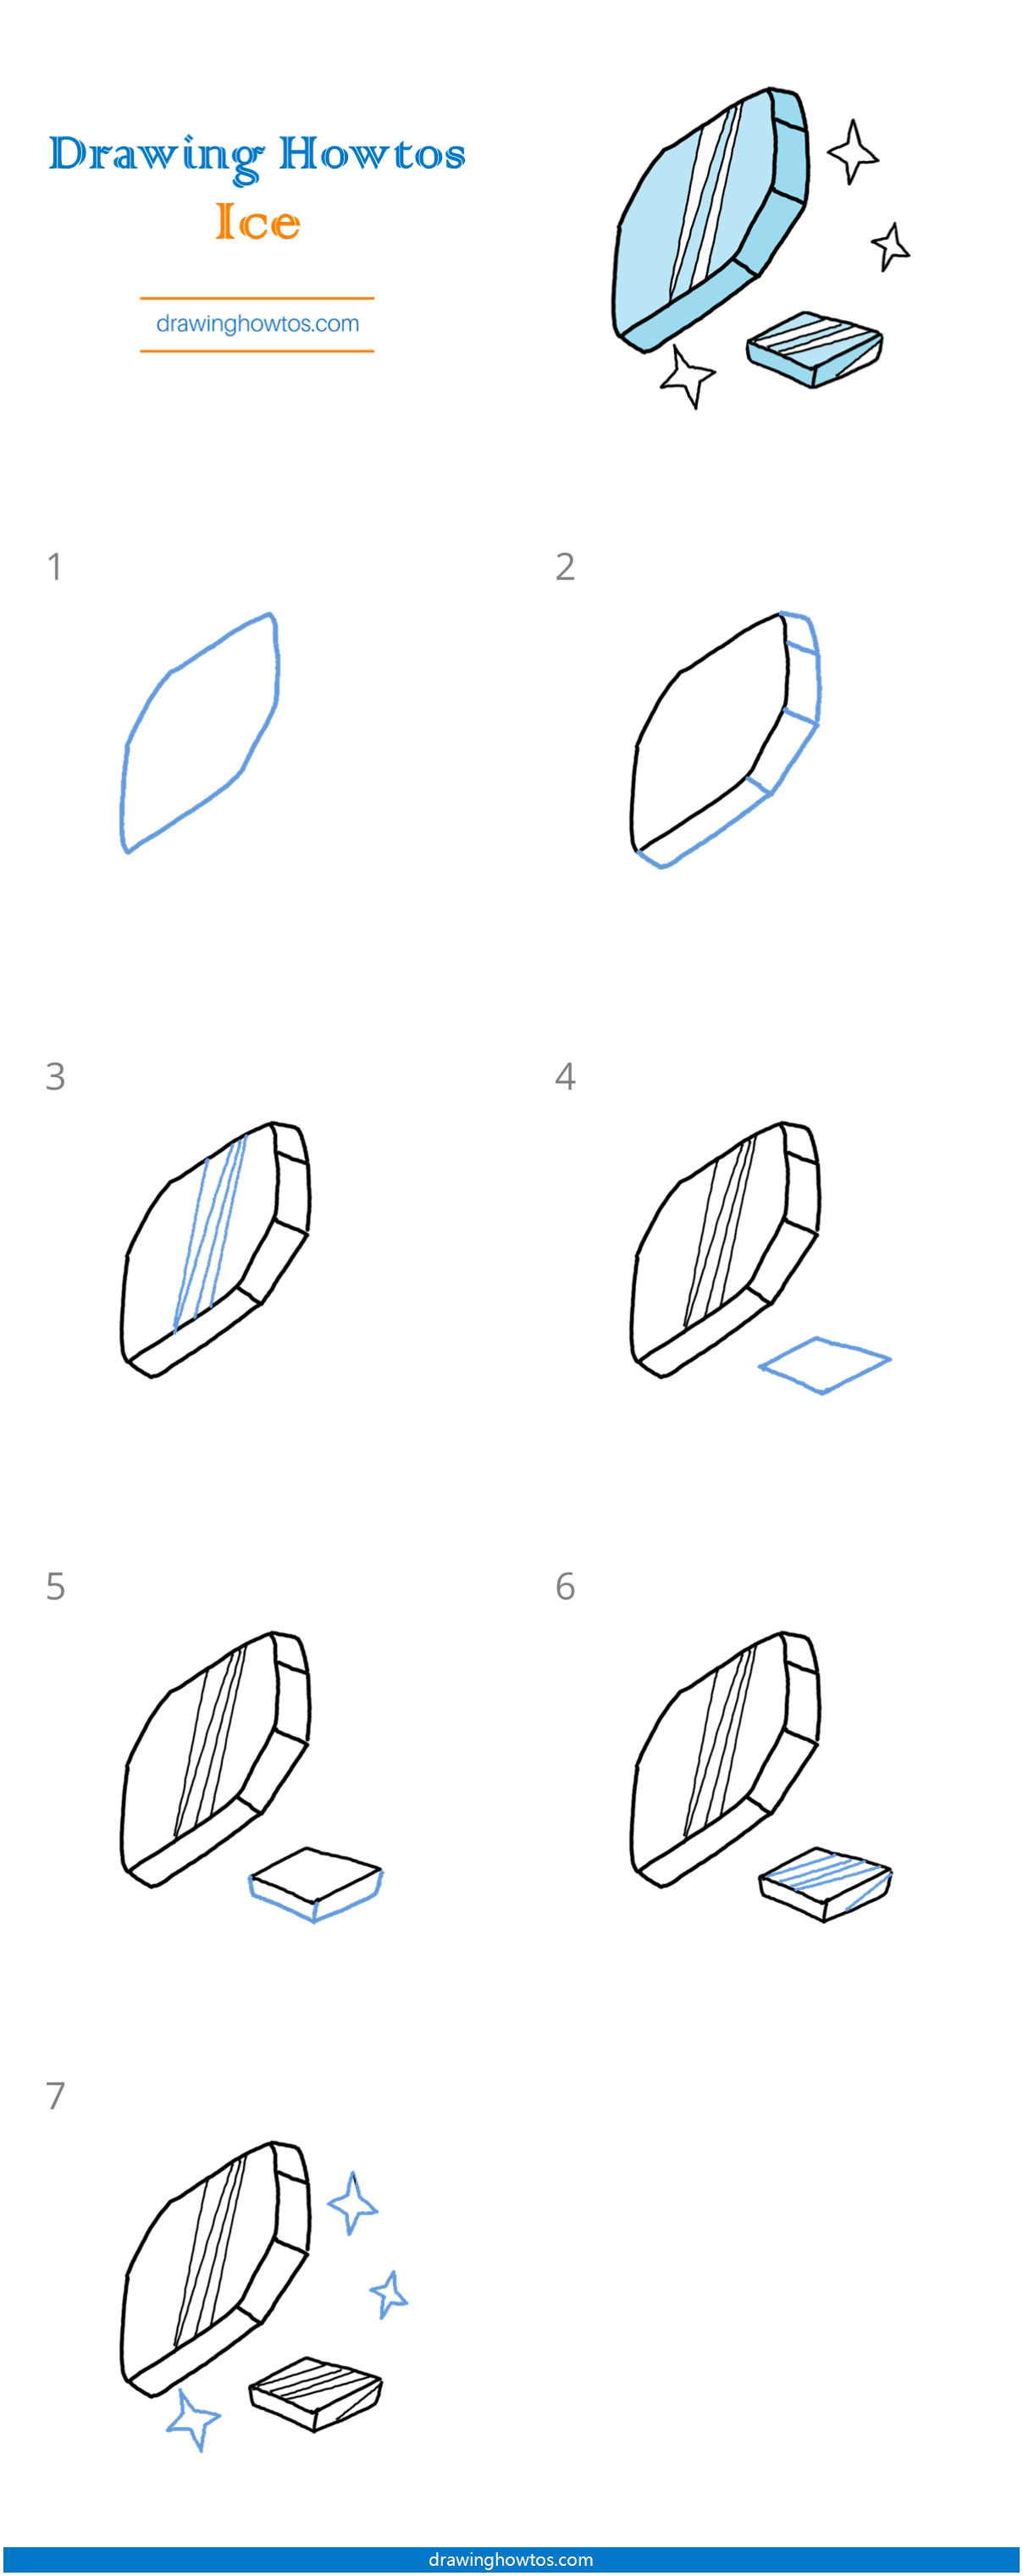 How to Draw Ice Step by Step